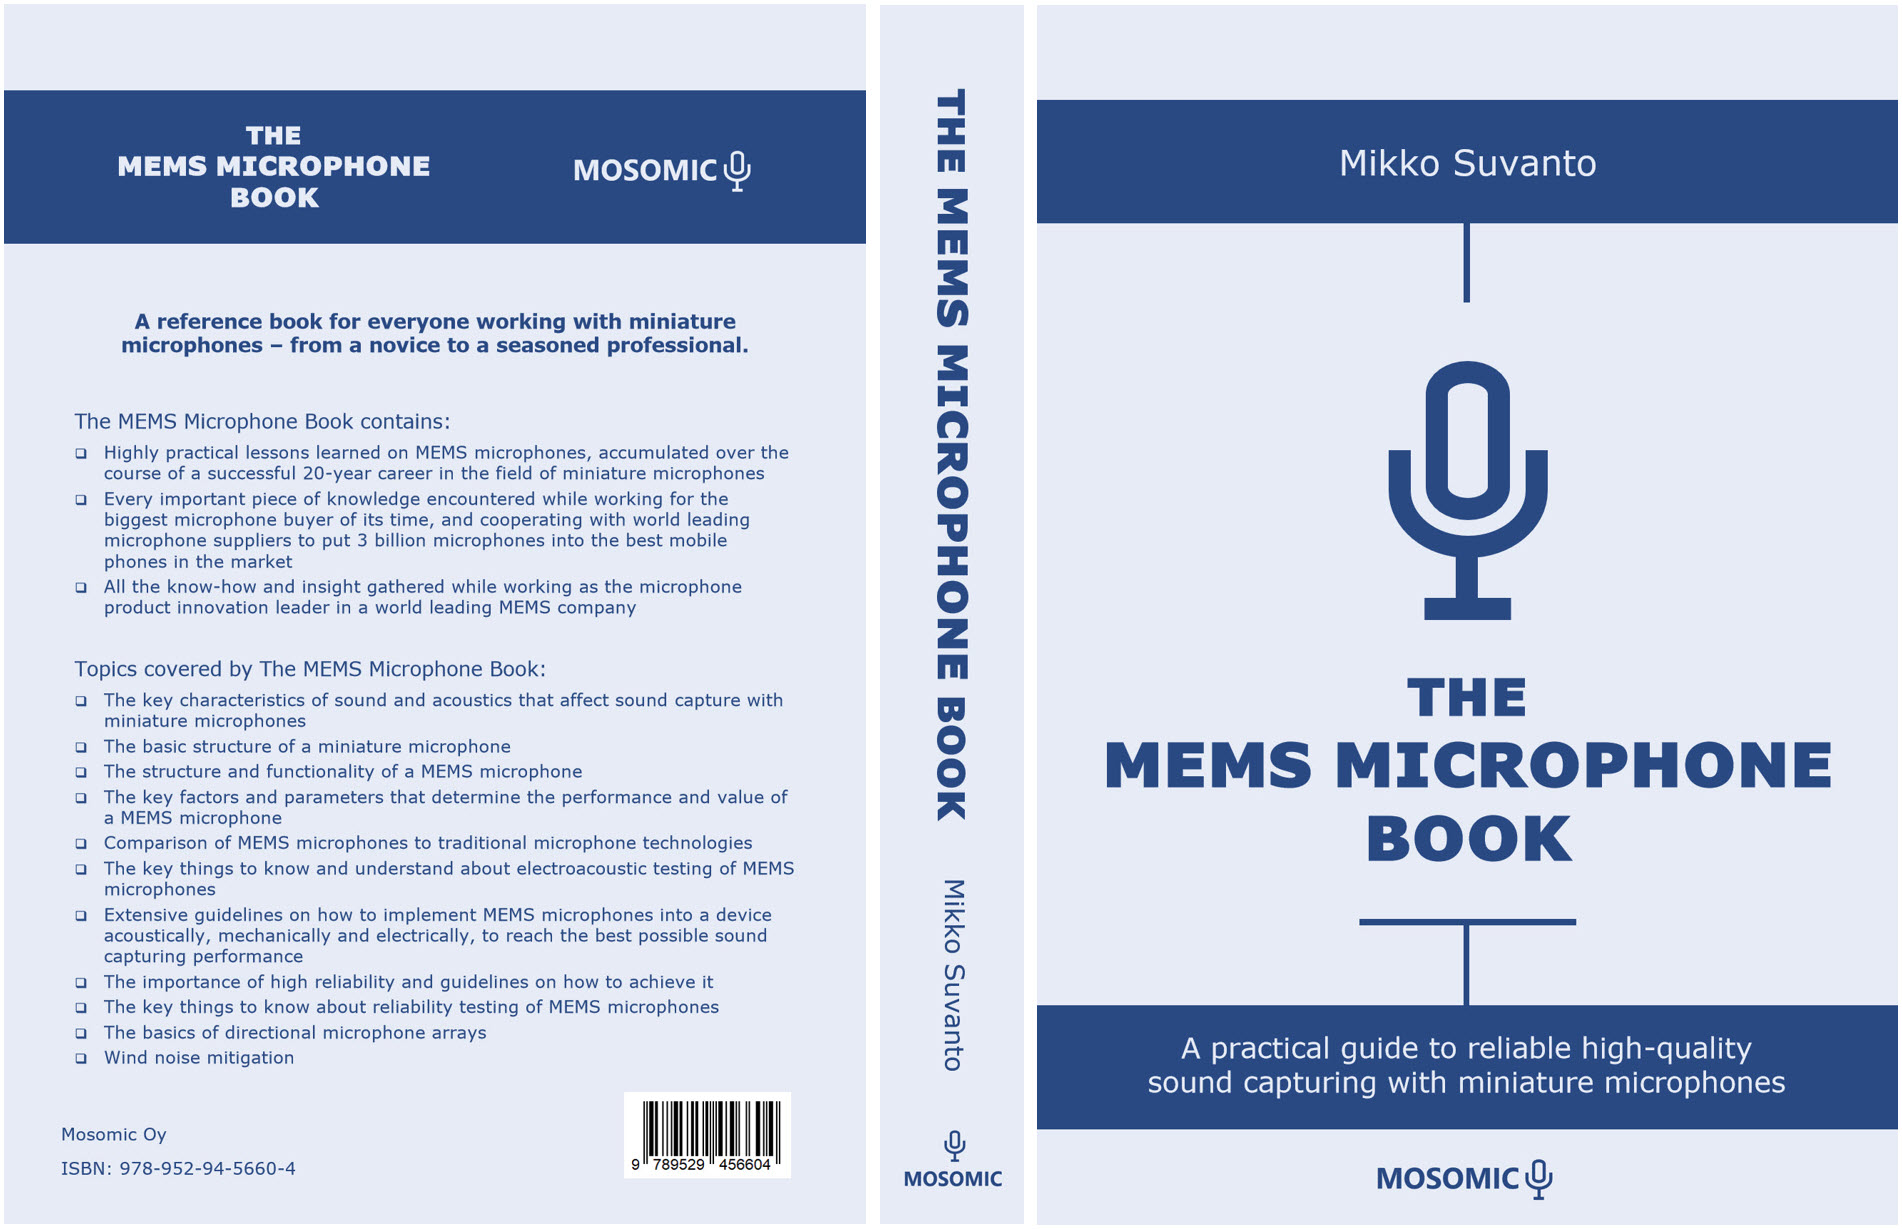 The Microphone Book Covers